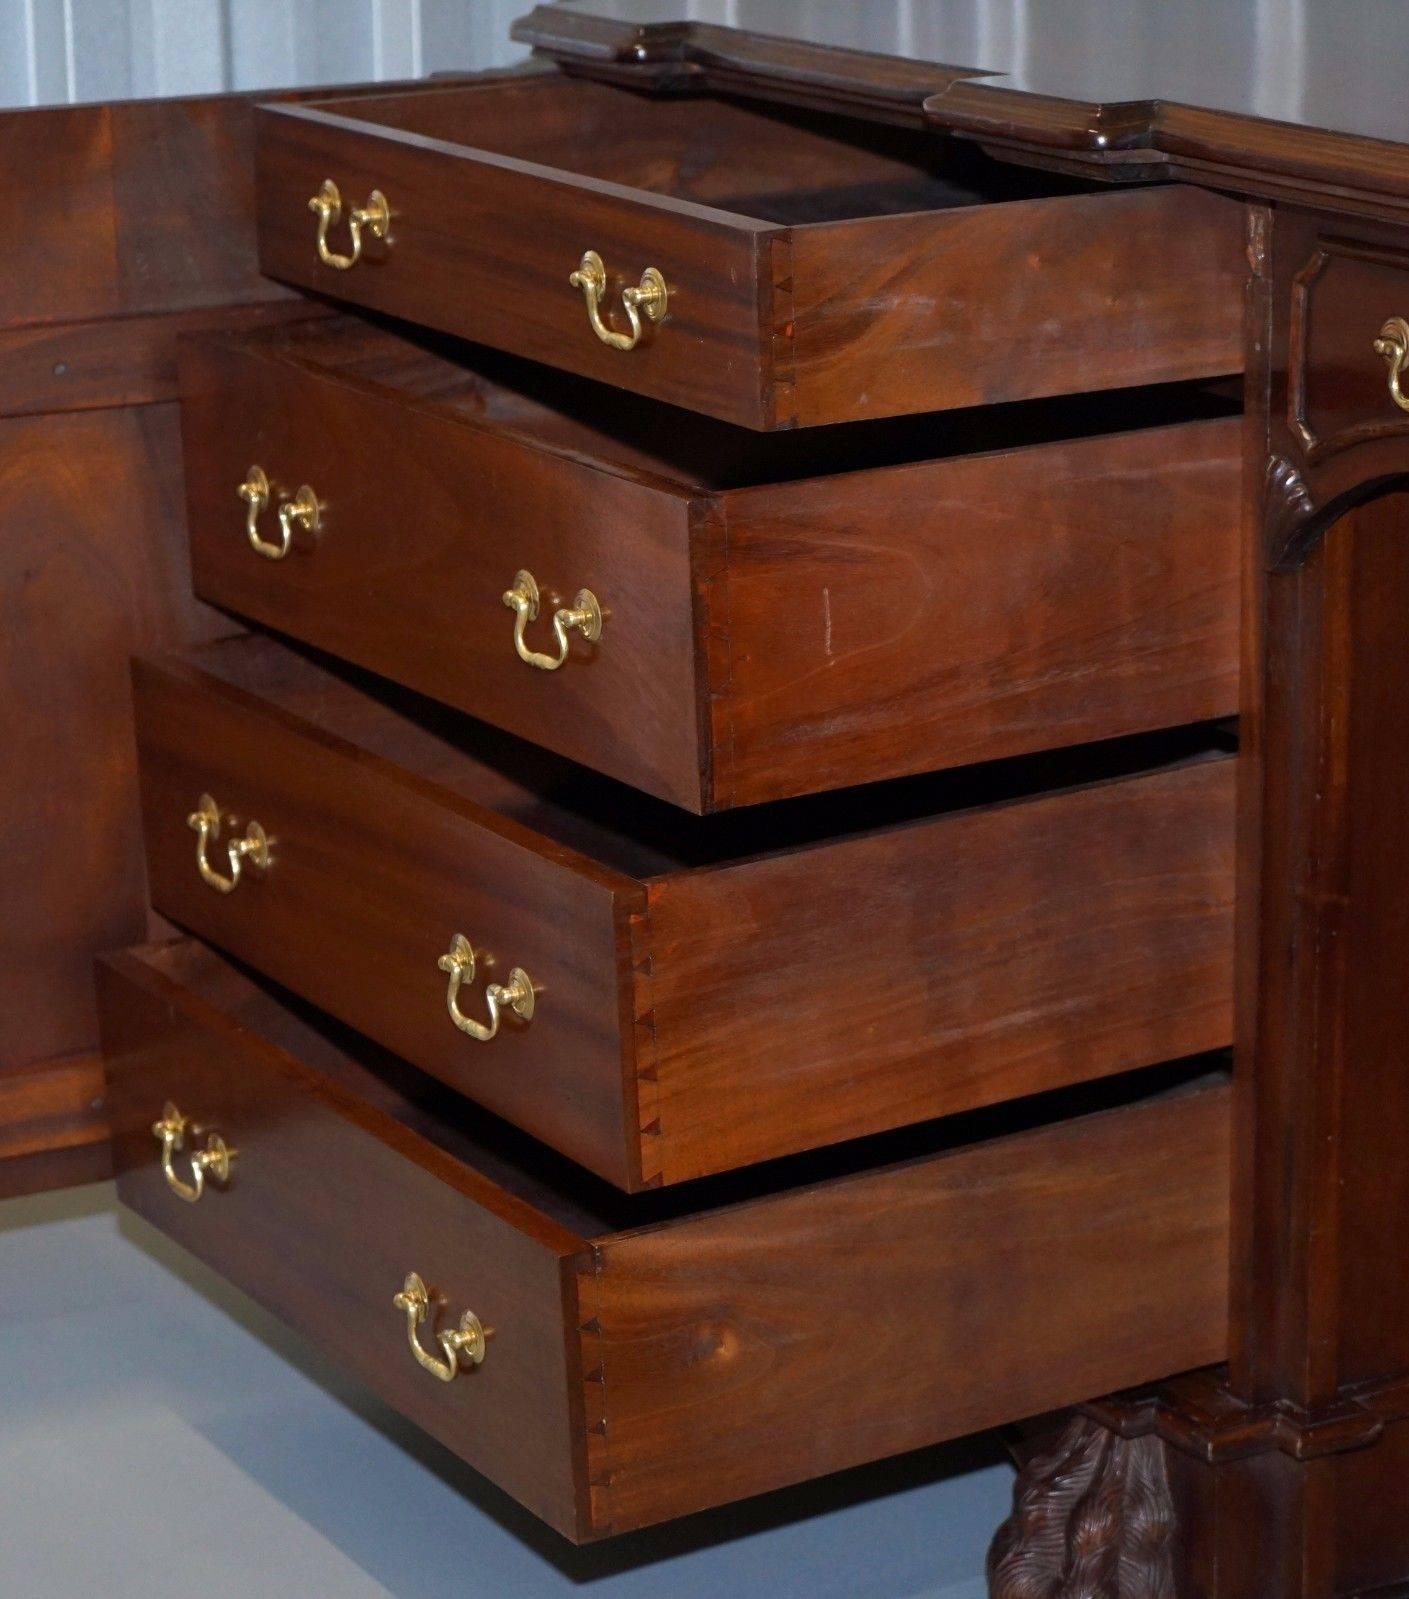 We are delighted to offer for sale this lovely Victorian solid mahogany twin pedestal partner desk which is an exact replica of Thomas Chippendales masterpiece created for Sir Rowland Winn in 1767 currently exhibited at his residence in Nostell